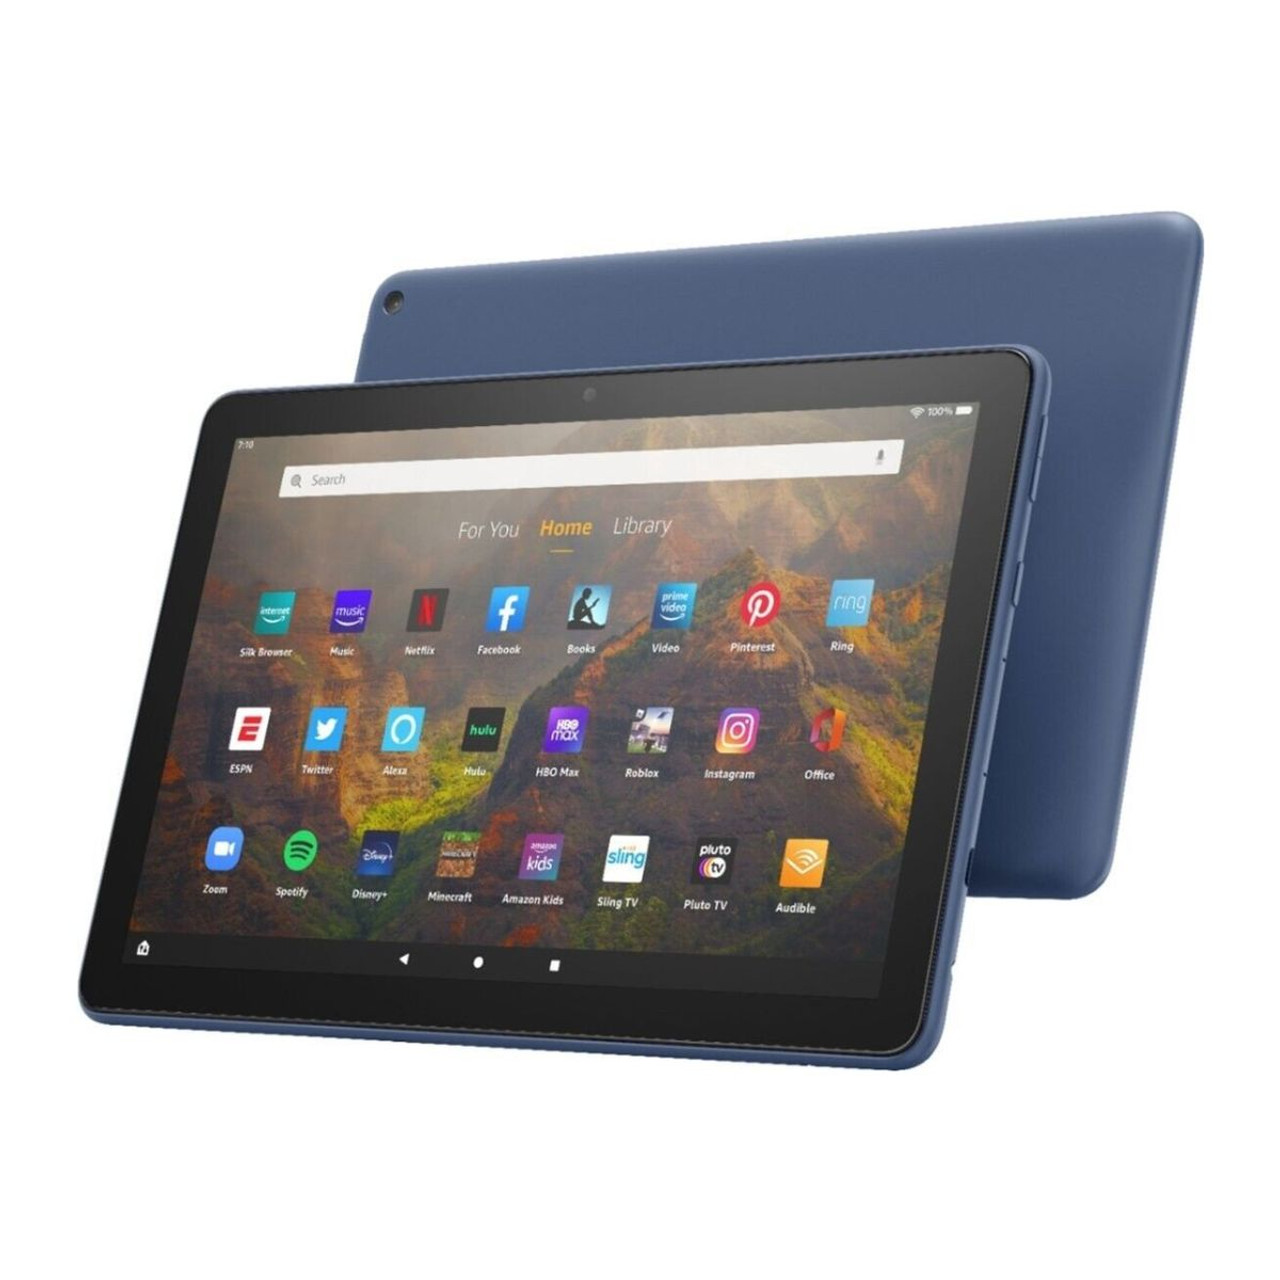 Fire HD 10 Tablet, 10.1", 1080p Full HD, 32 GB product image